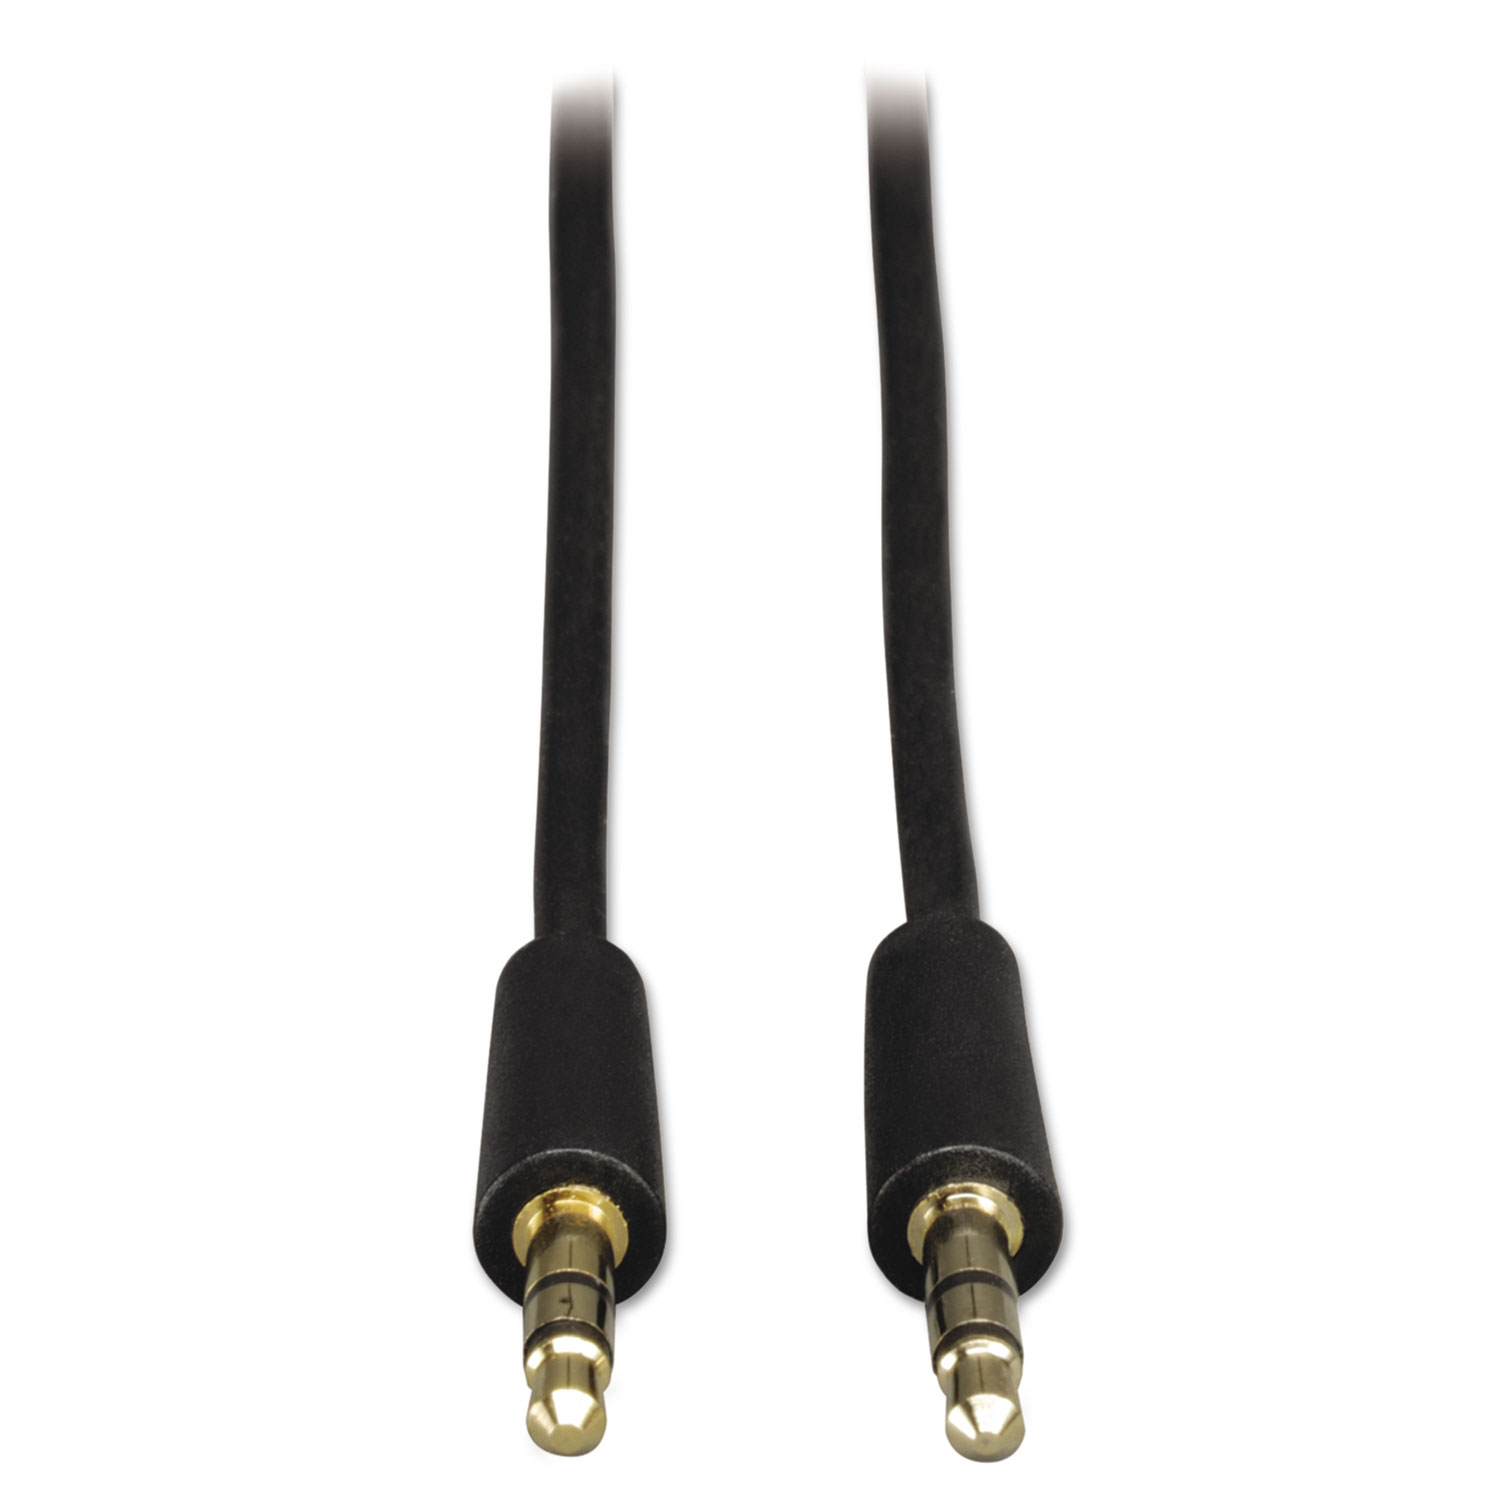 Audio Cables, 6 ft, Black, 3.5 mm Male; 3.5 mm Male